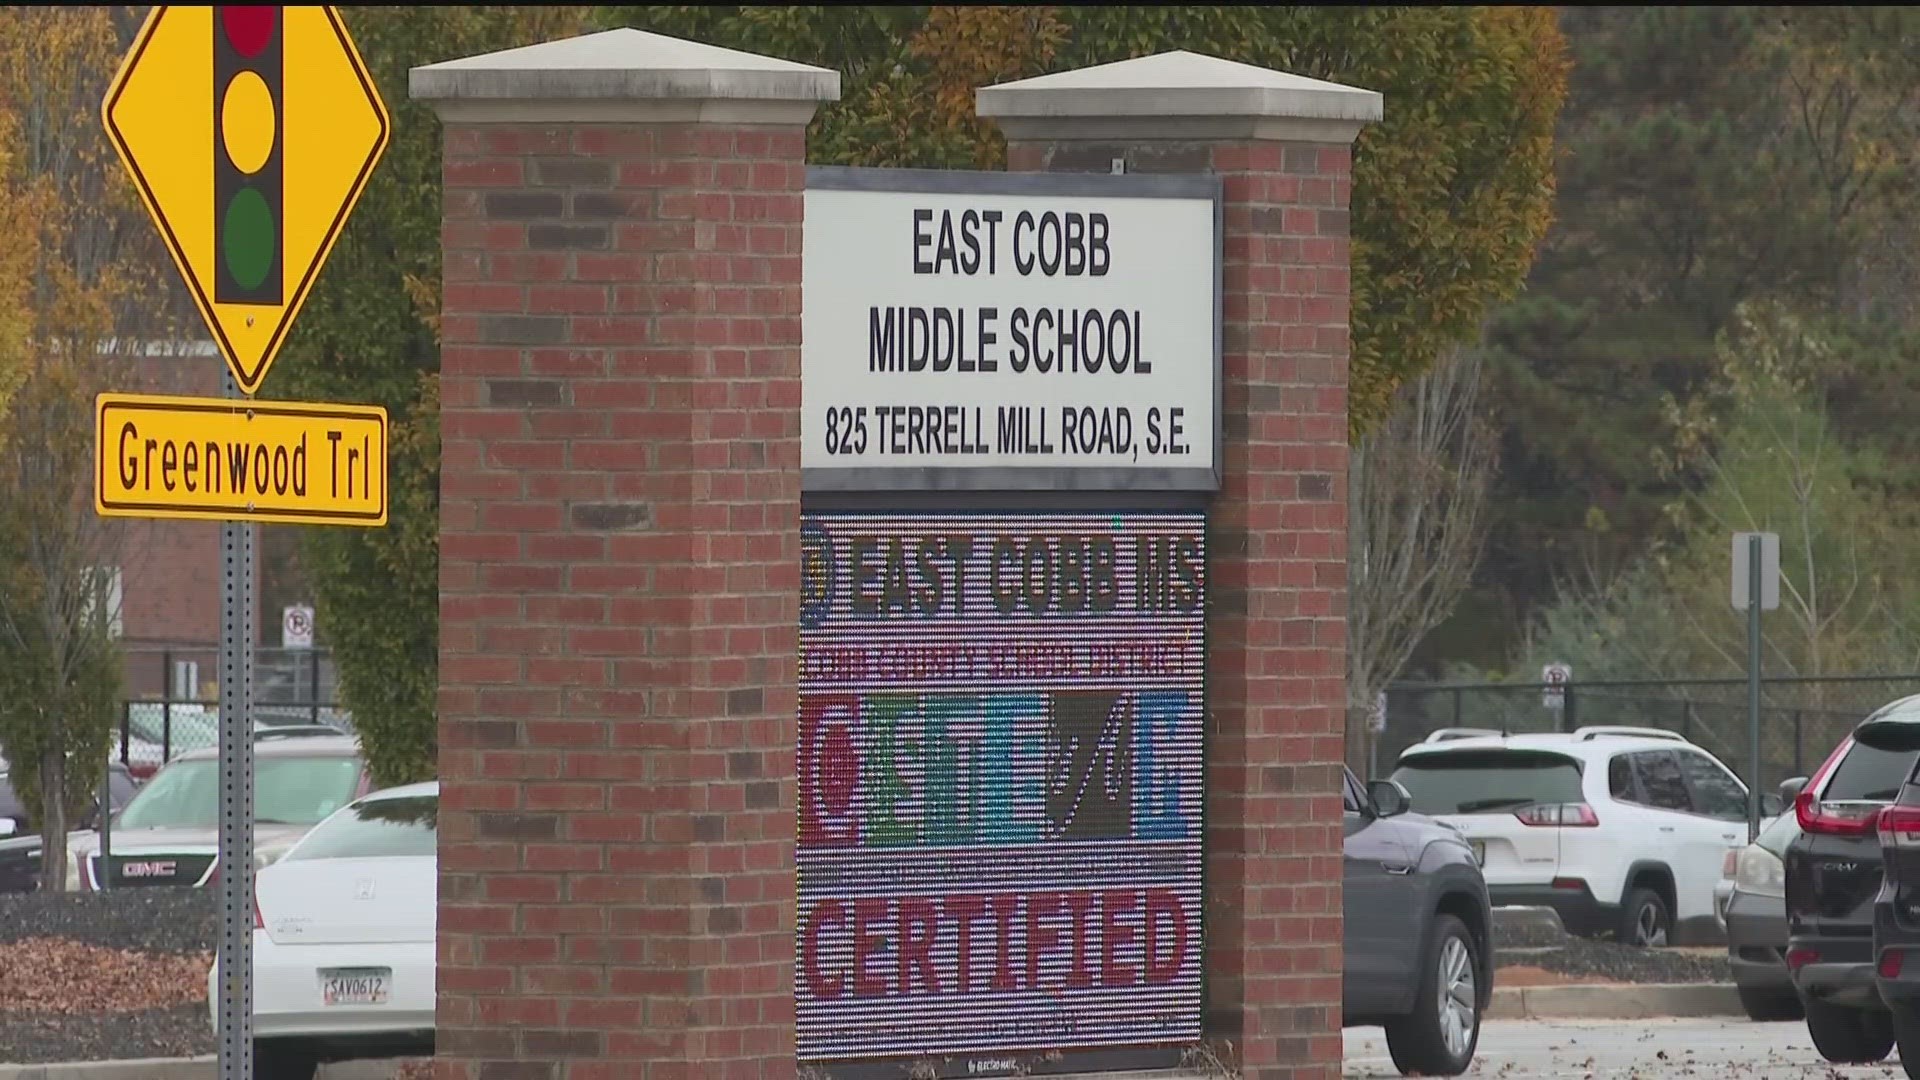 East Cobb Middle School experienced a code red that was accidentally triggered due to 'human error.'